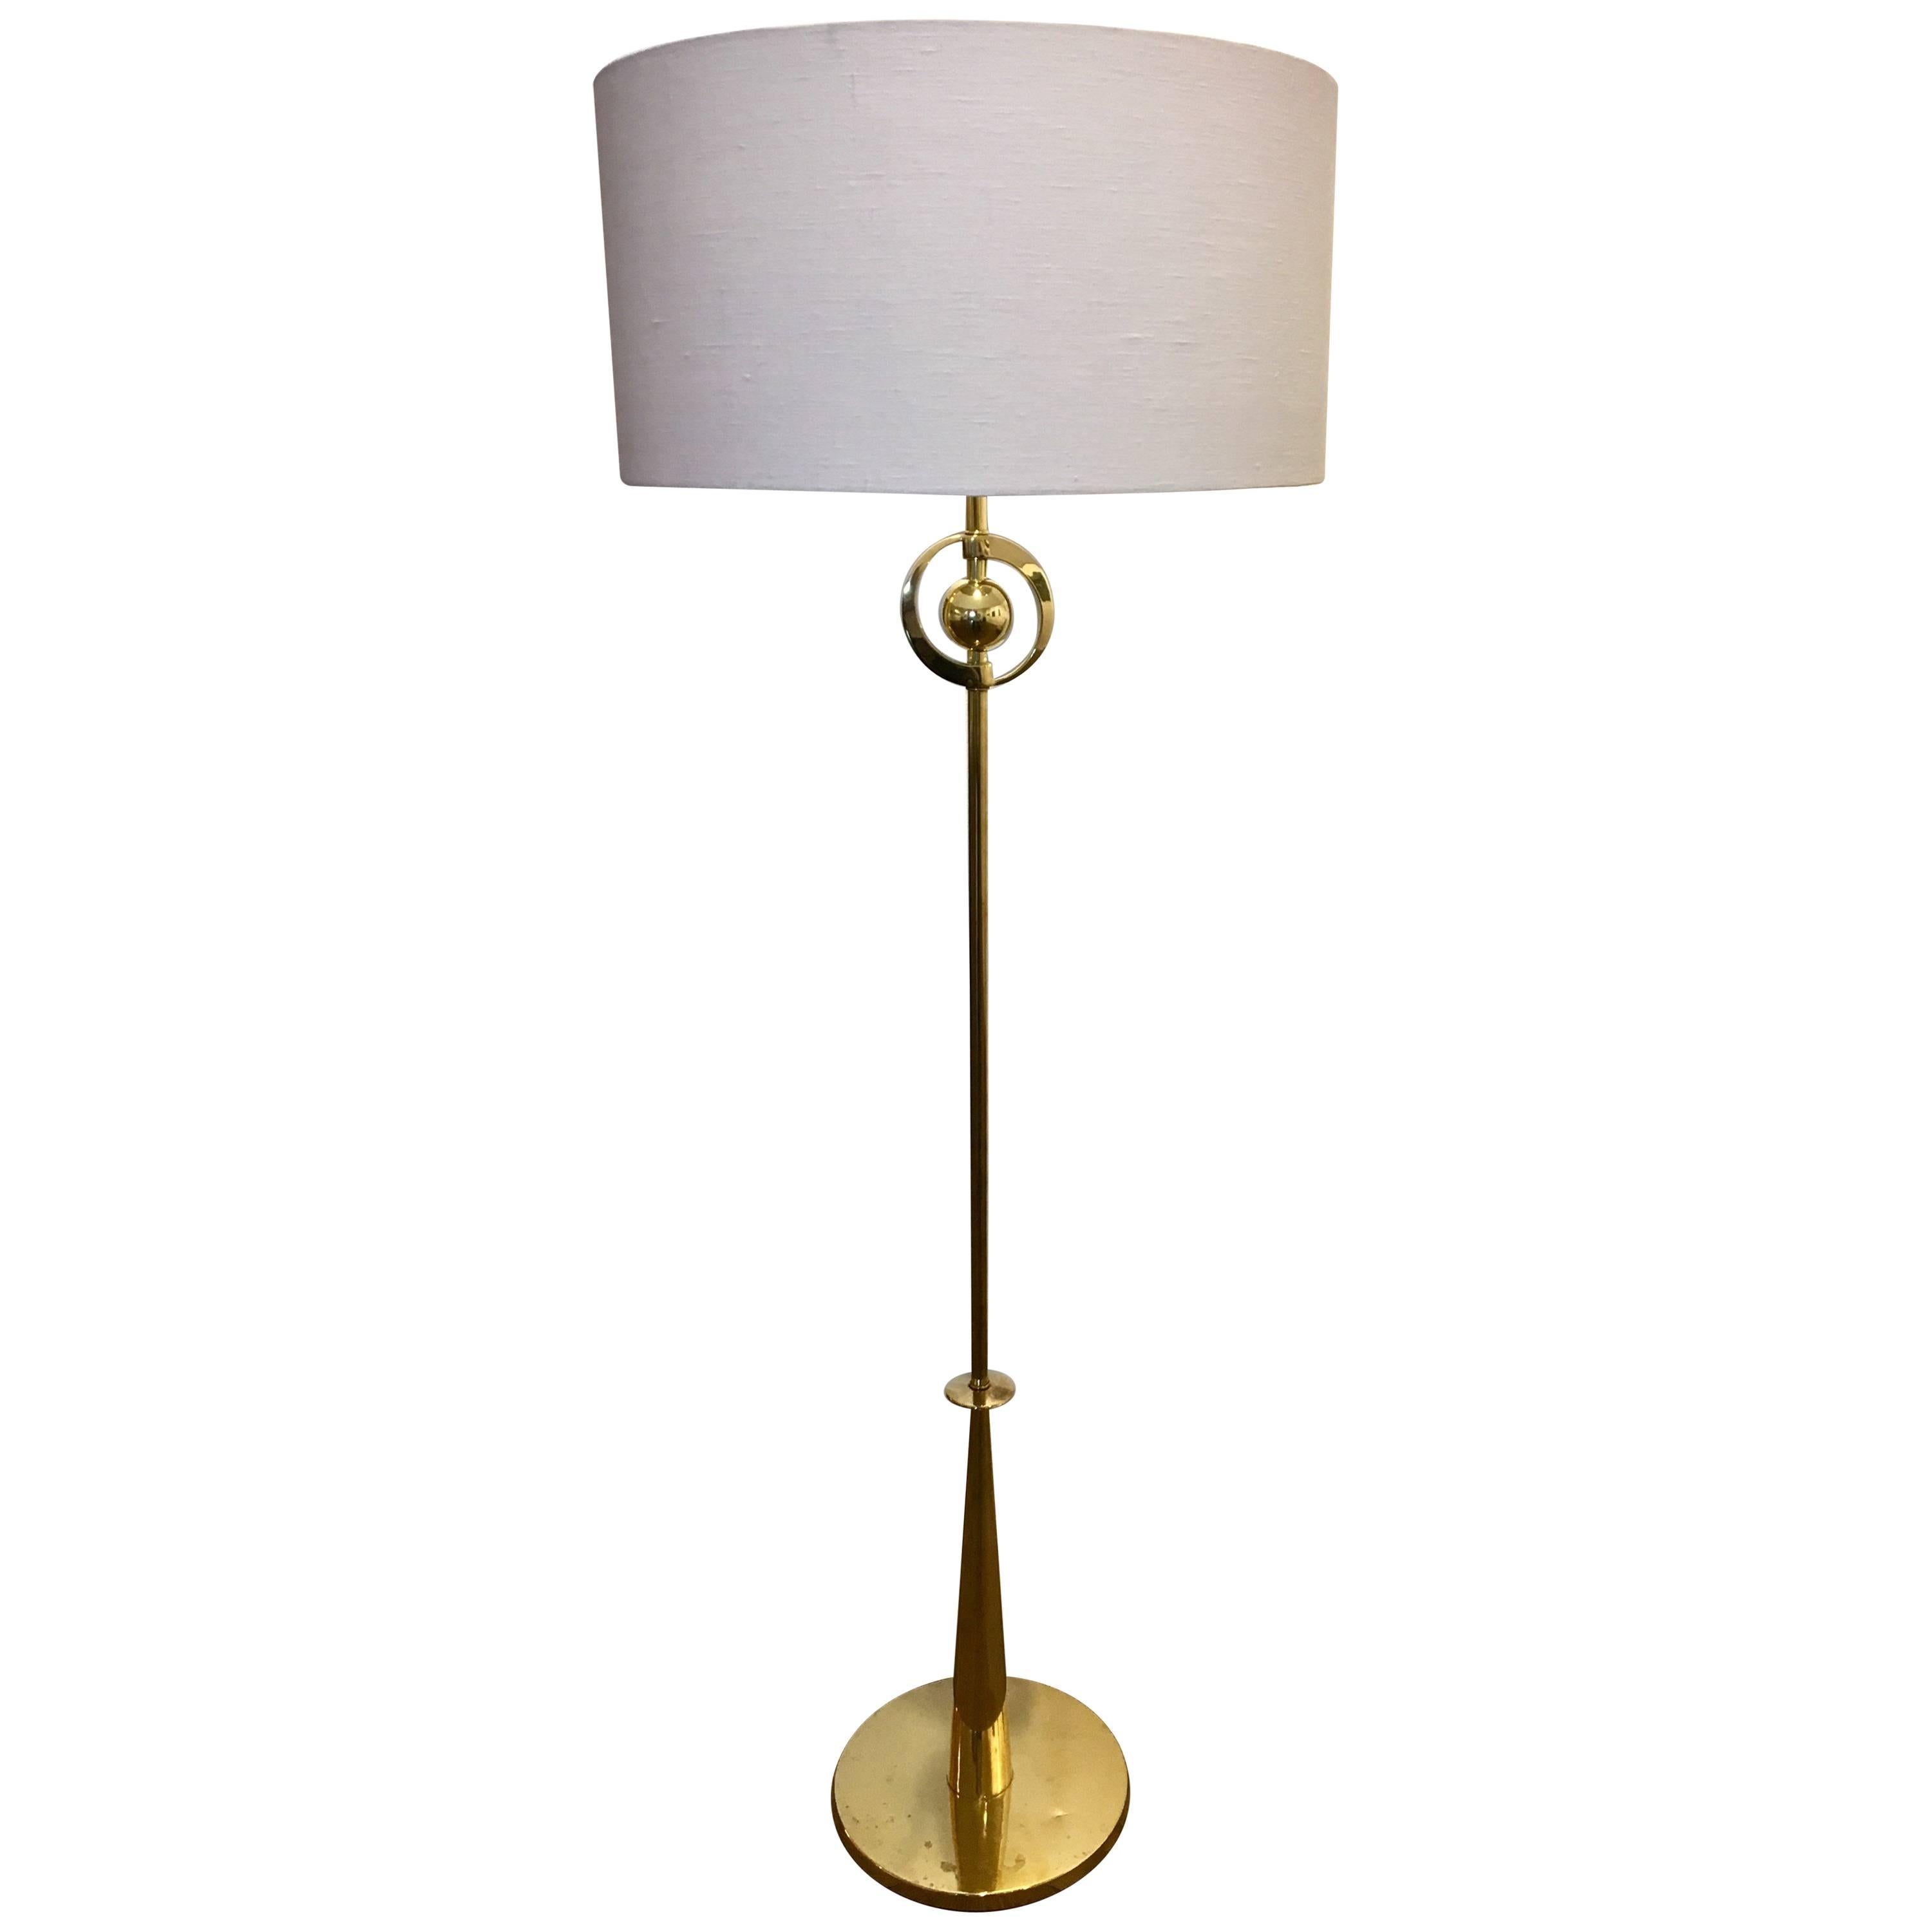 Art Deco Polished Brass Floor Lamp by the Rembrandt Lamp Company